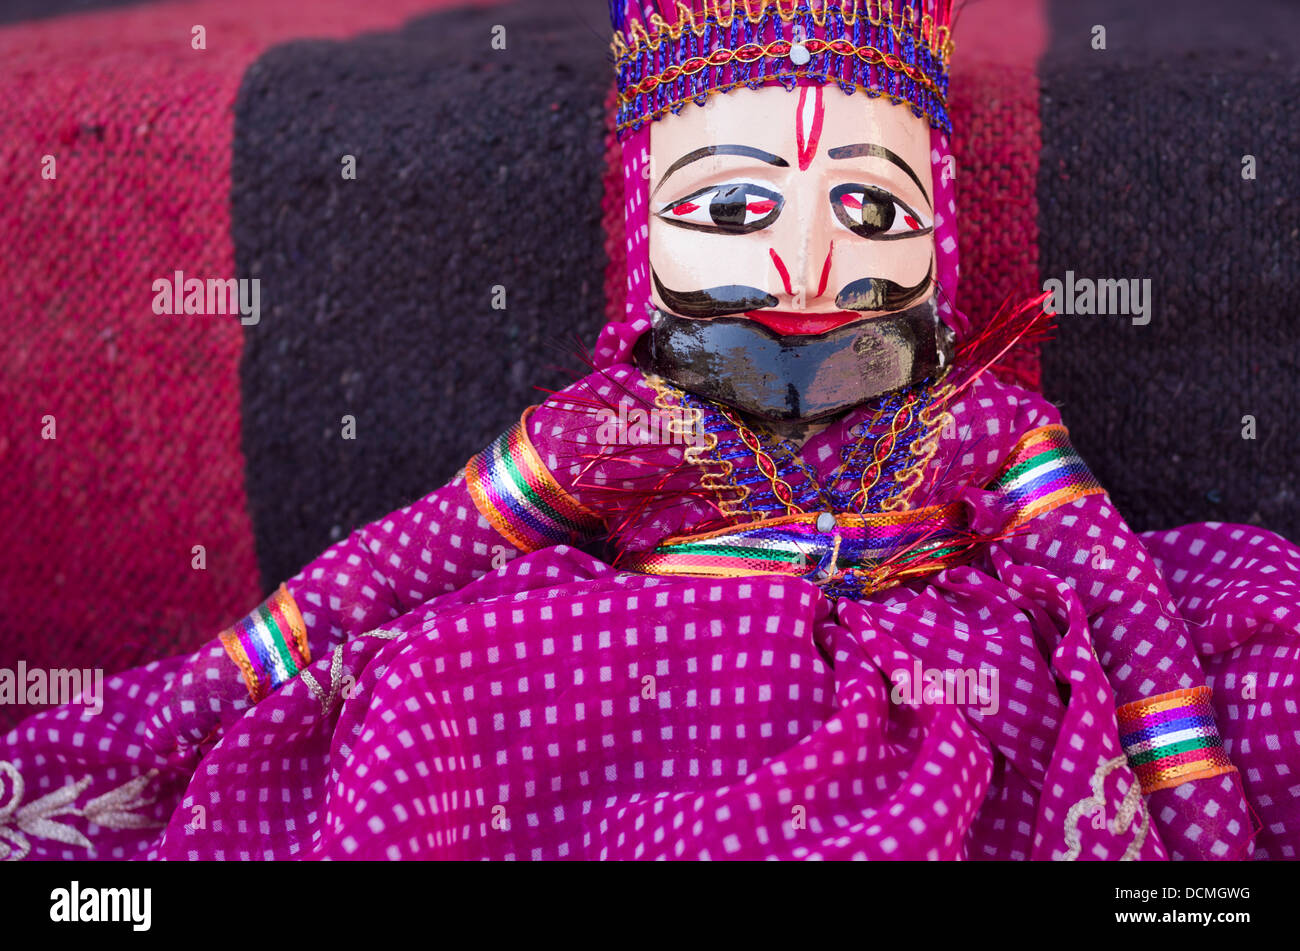 Puppet in vendita presso il City Palace - Jaipur, Rajasthan, India Foto Stock